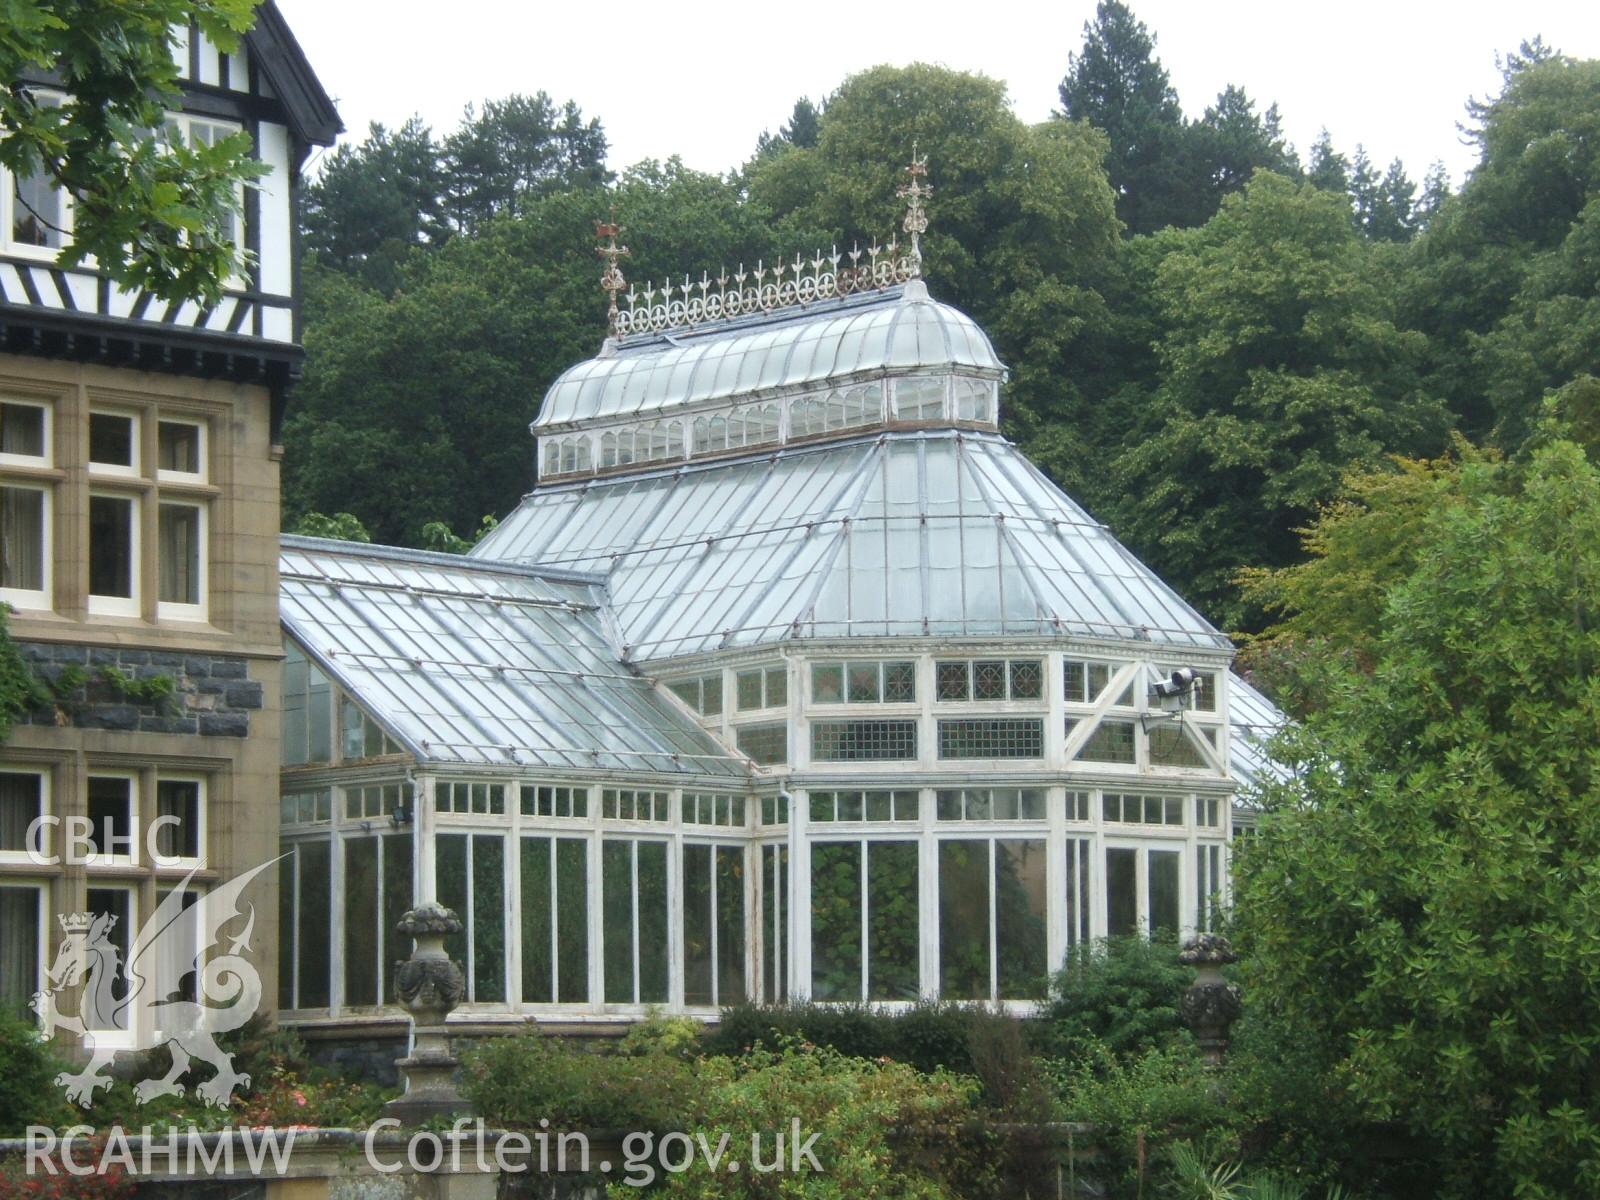 General view of the Conservatory from the south.